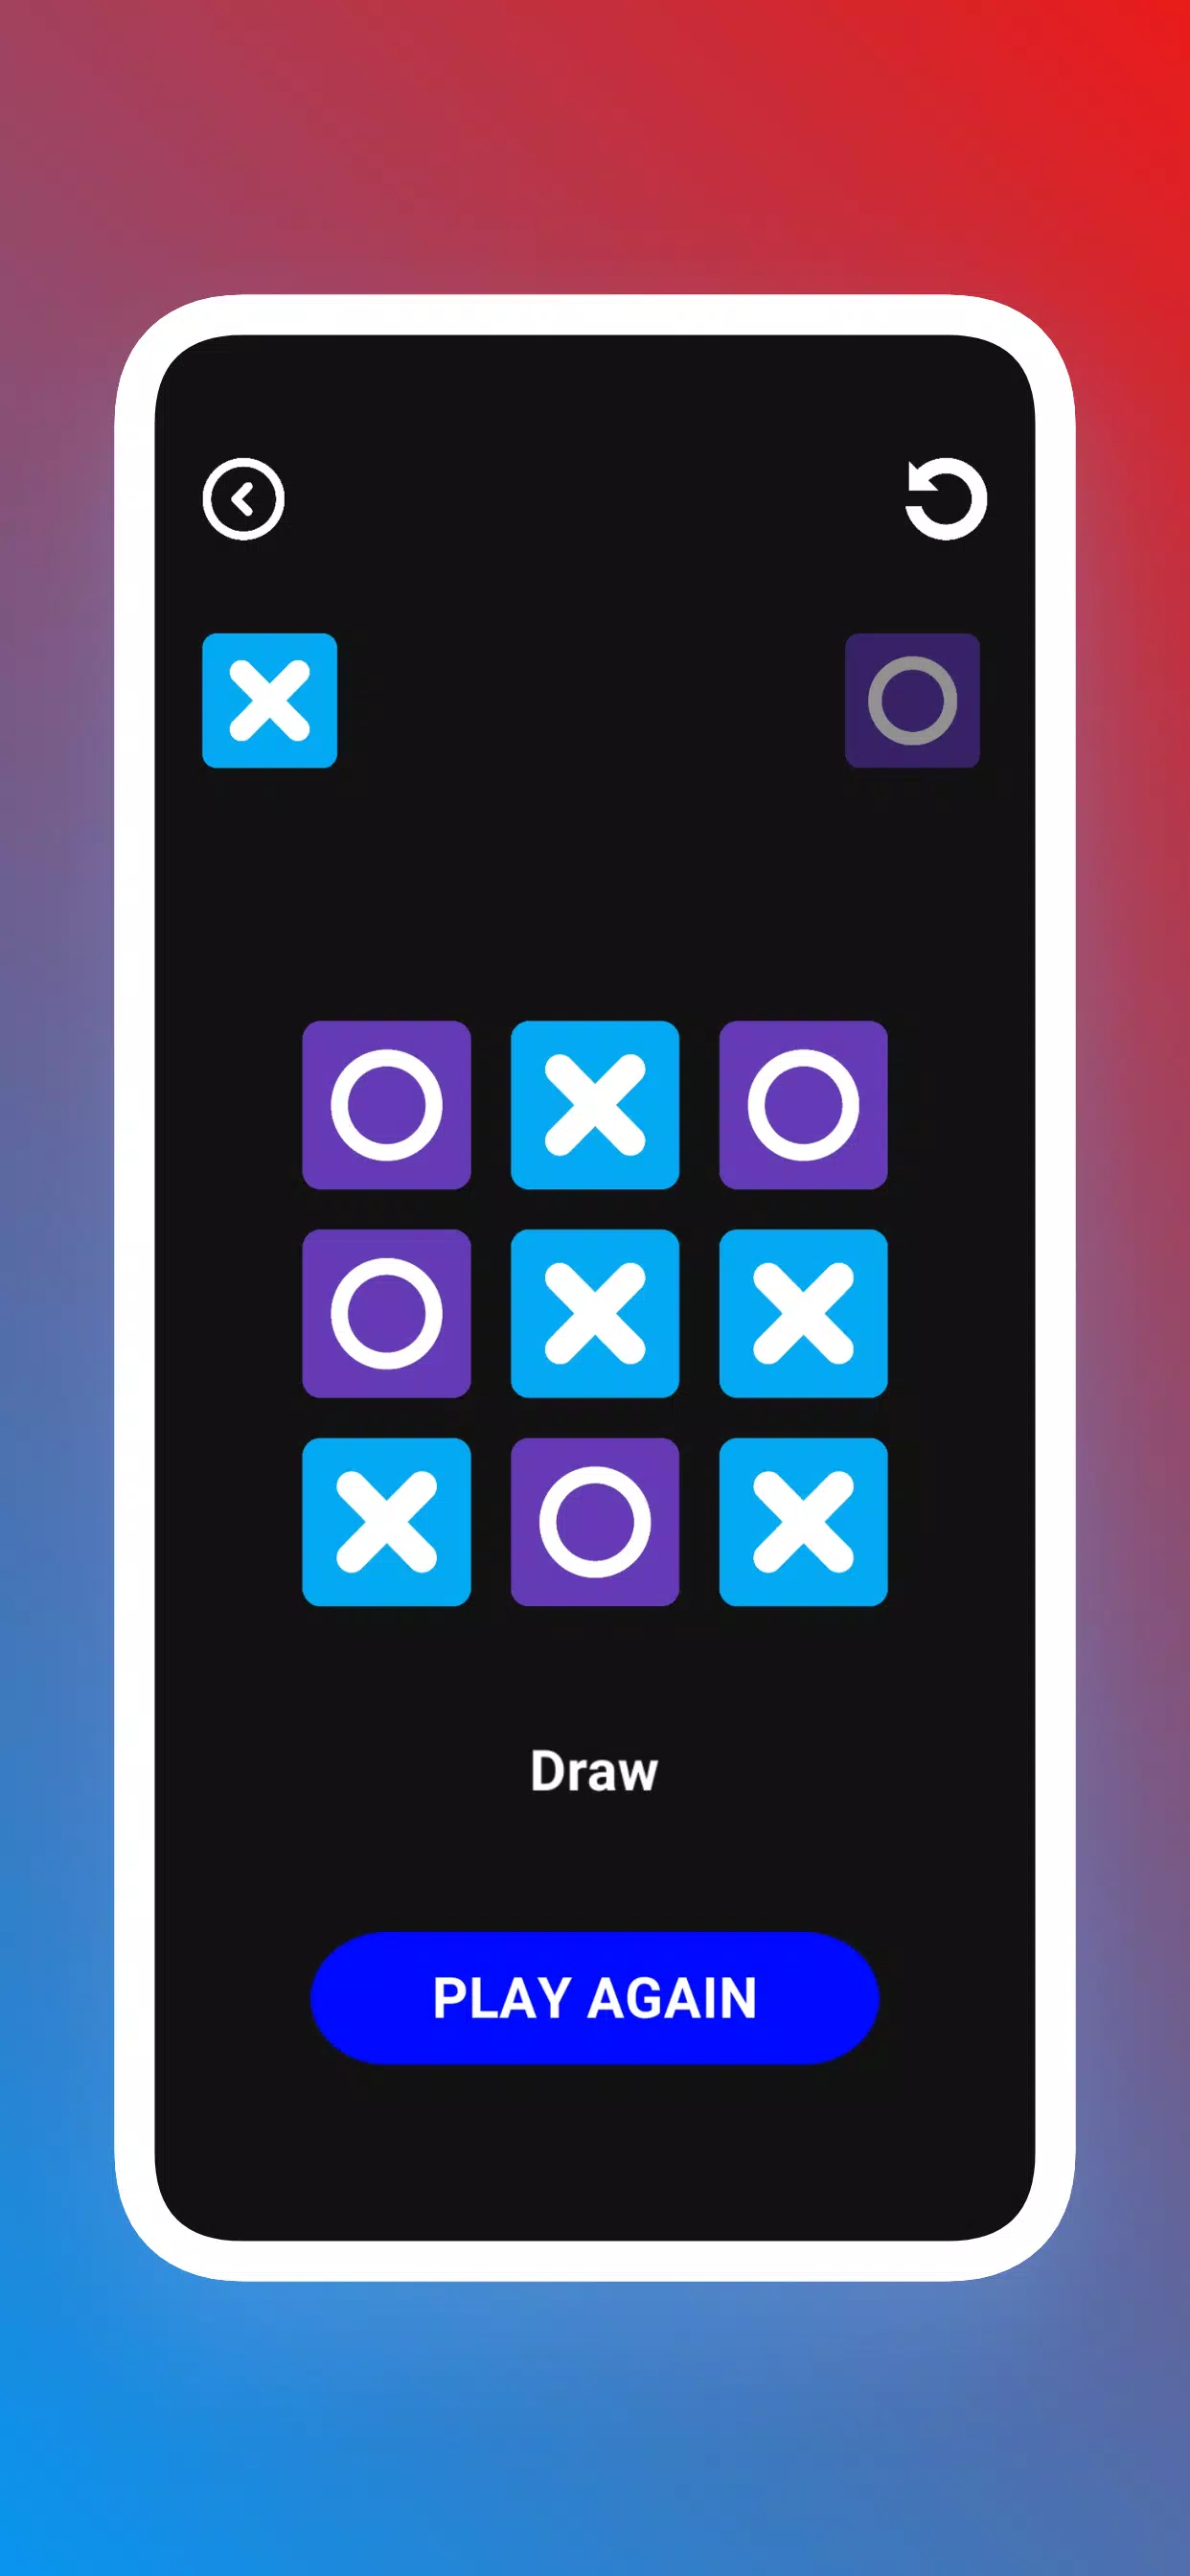 How to play Tic Tac Toe on mobile and Switch